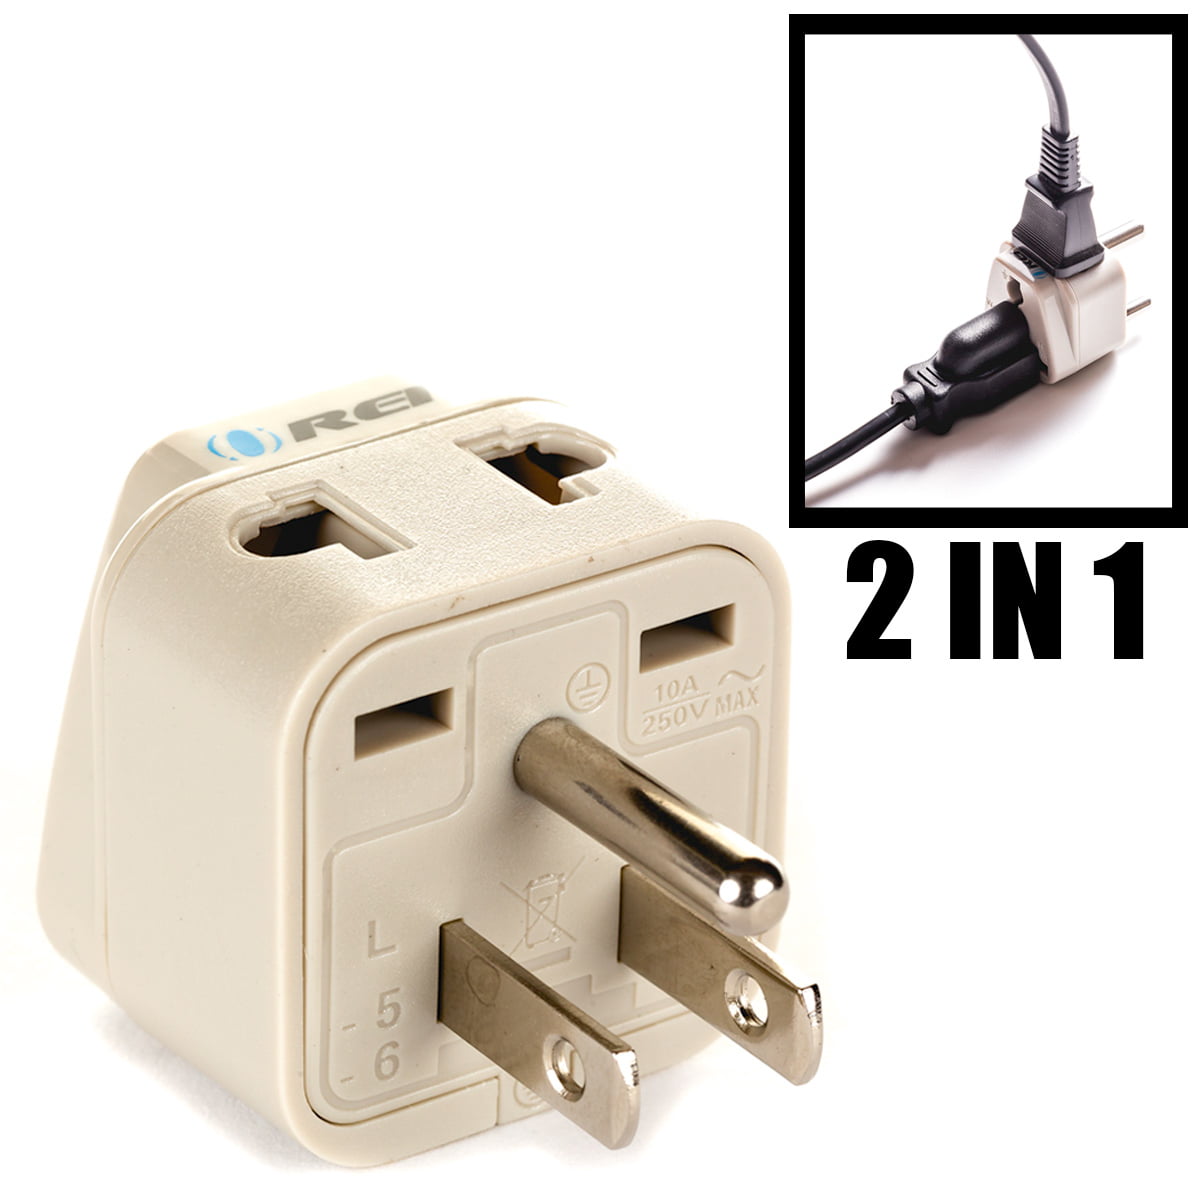 OREI WP-EF-GN Wonpro Universal 2-in-1 Schuko Plug Adapter Type E/F 2 Pack